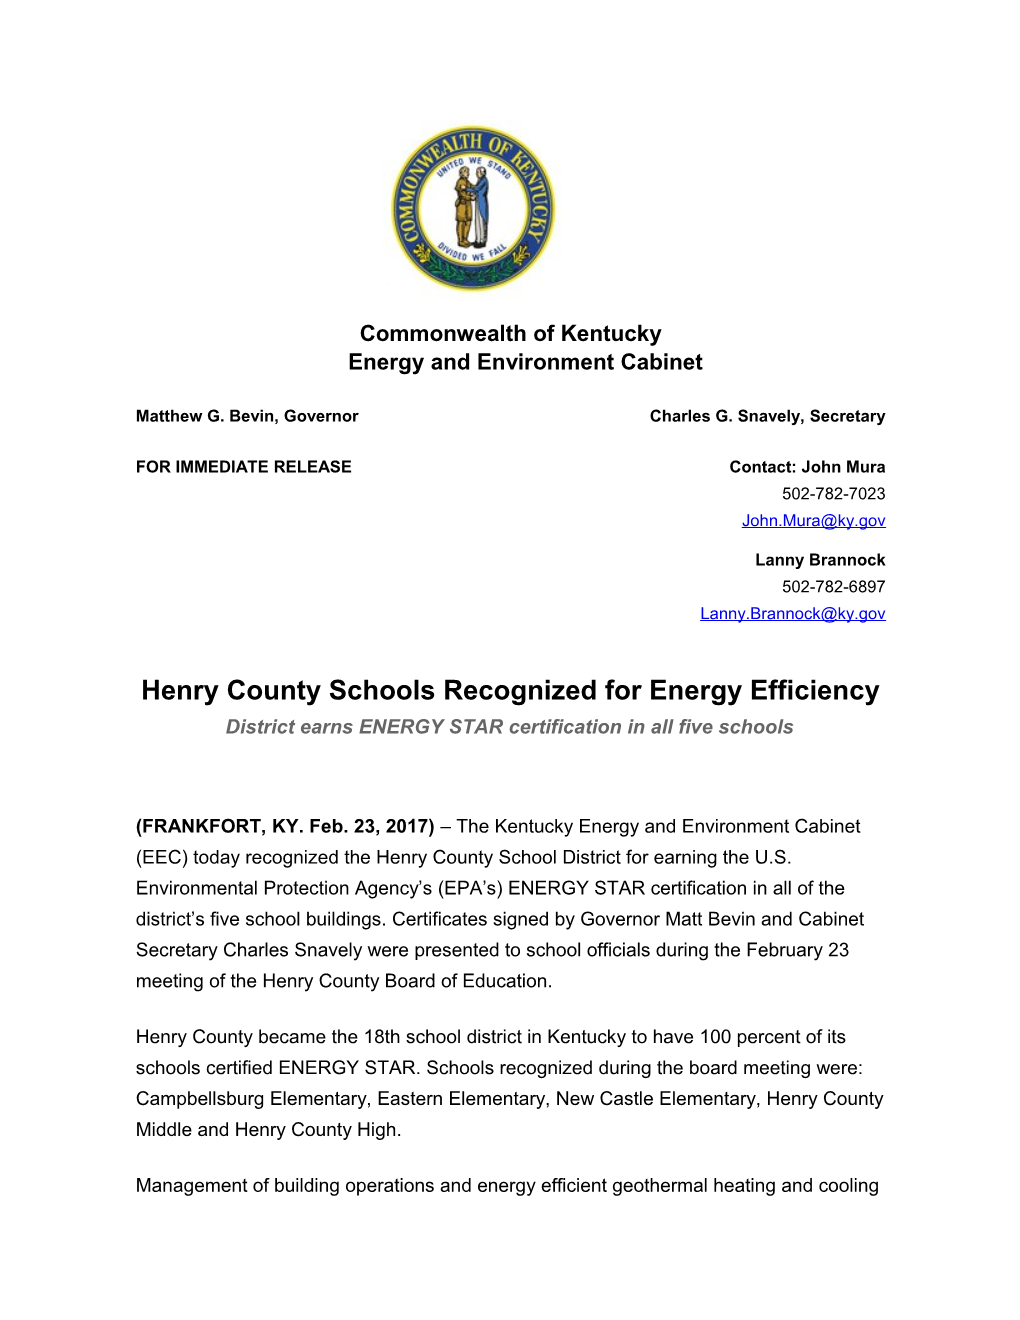 Henry County Schools Recognized for Energy Efficiency